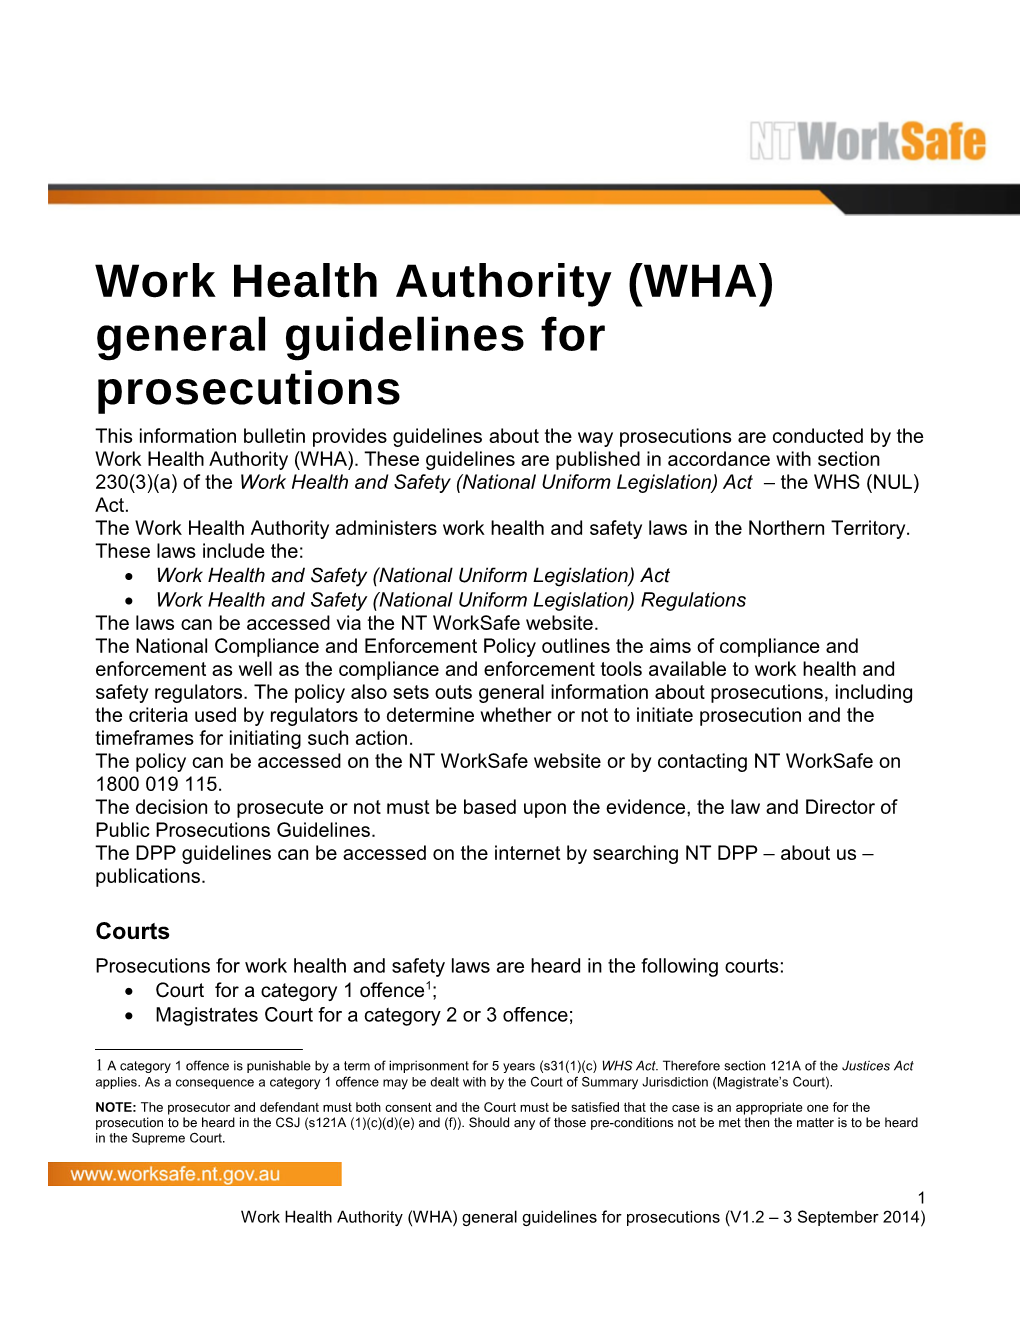 Work Health Authority General Guidelines for Prosecutions